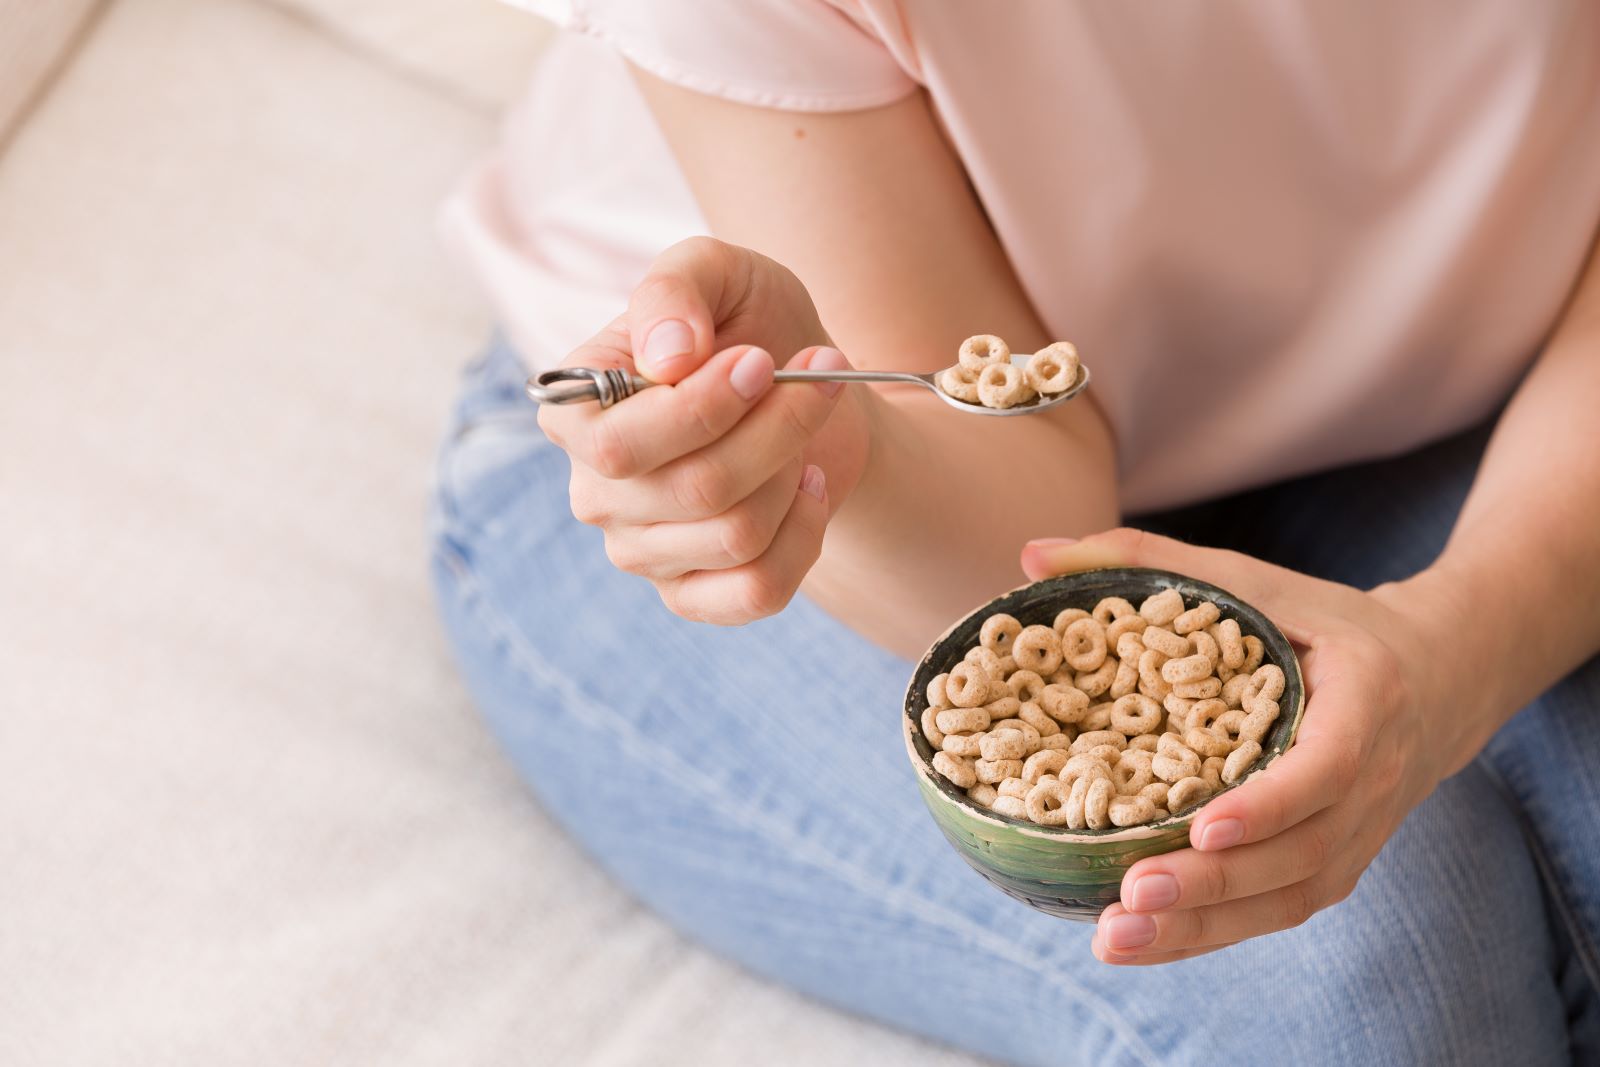 Do Cheerios Really Lower Your Cholesterol?